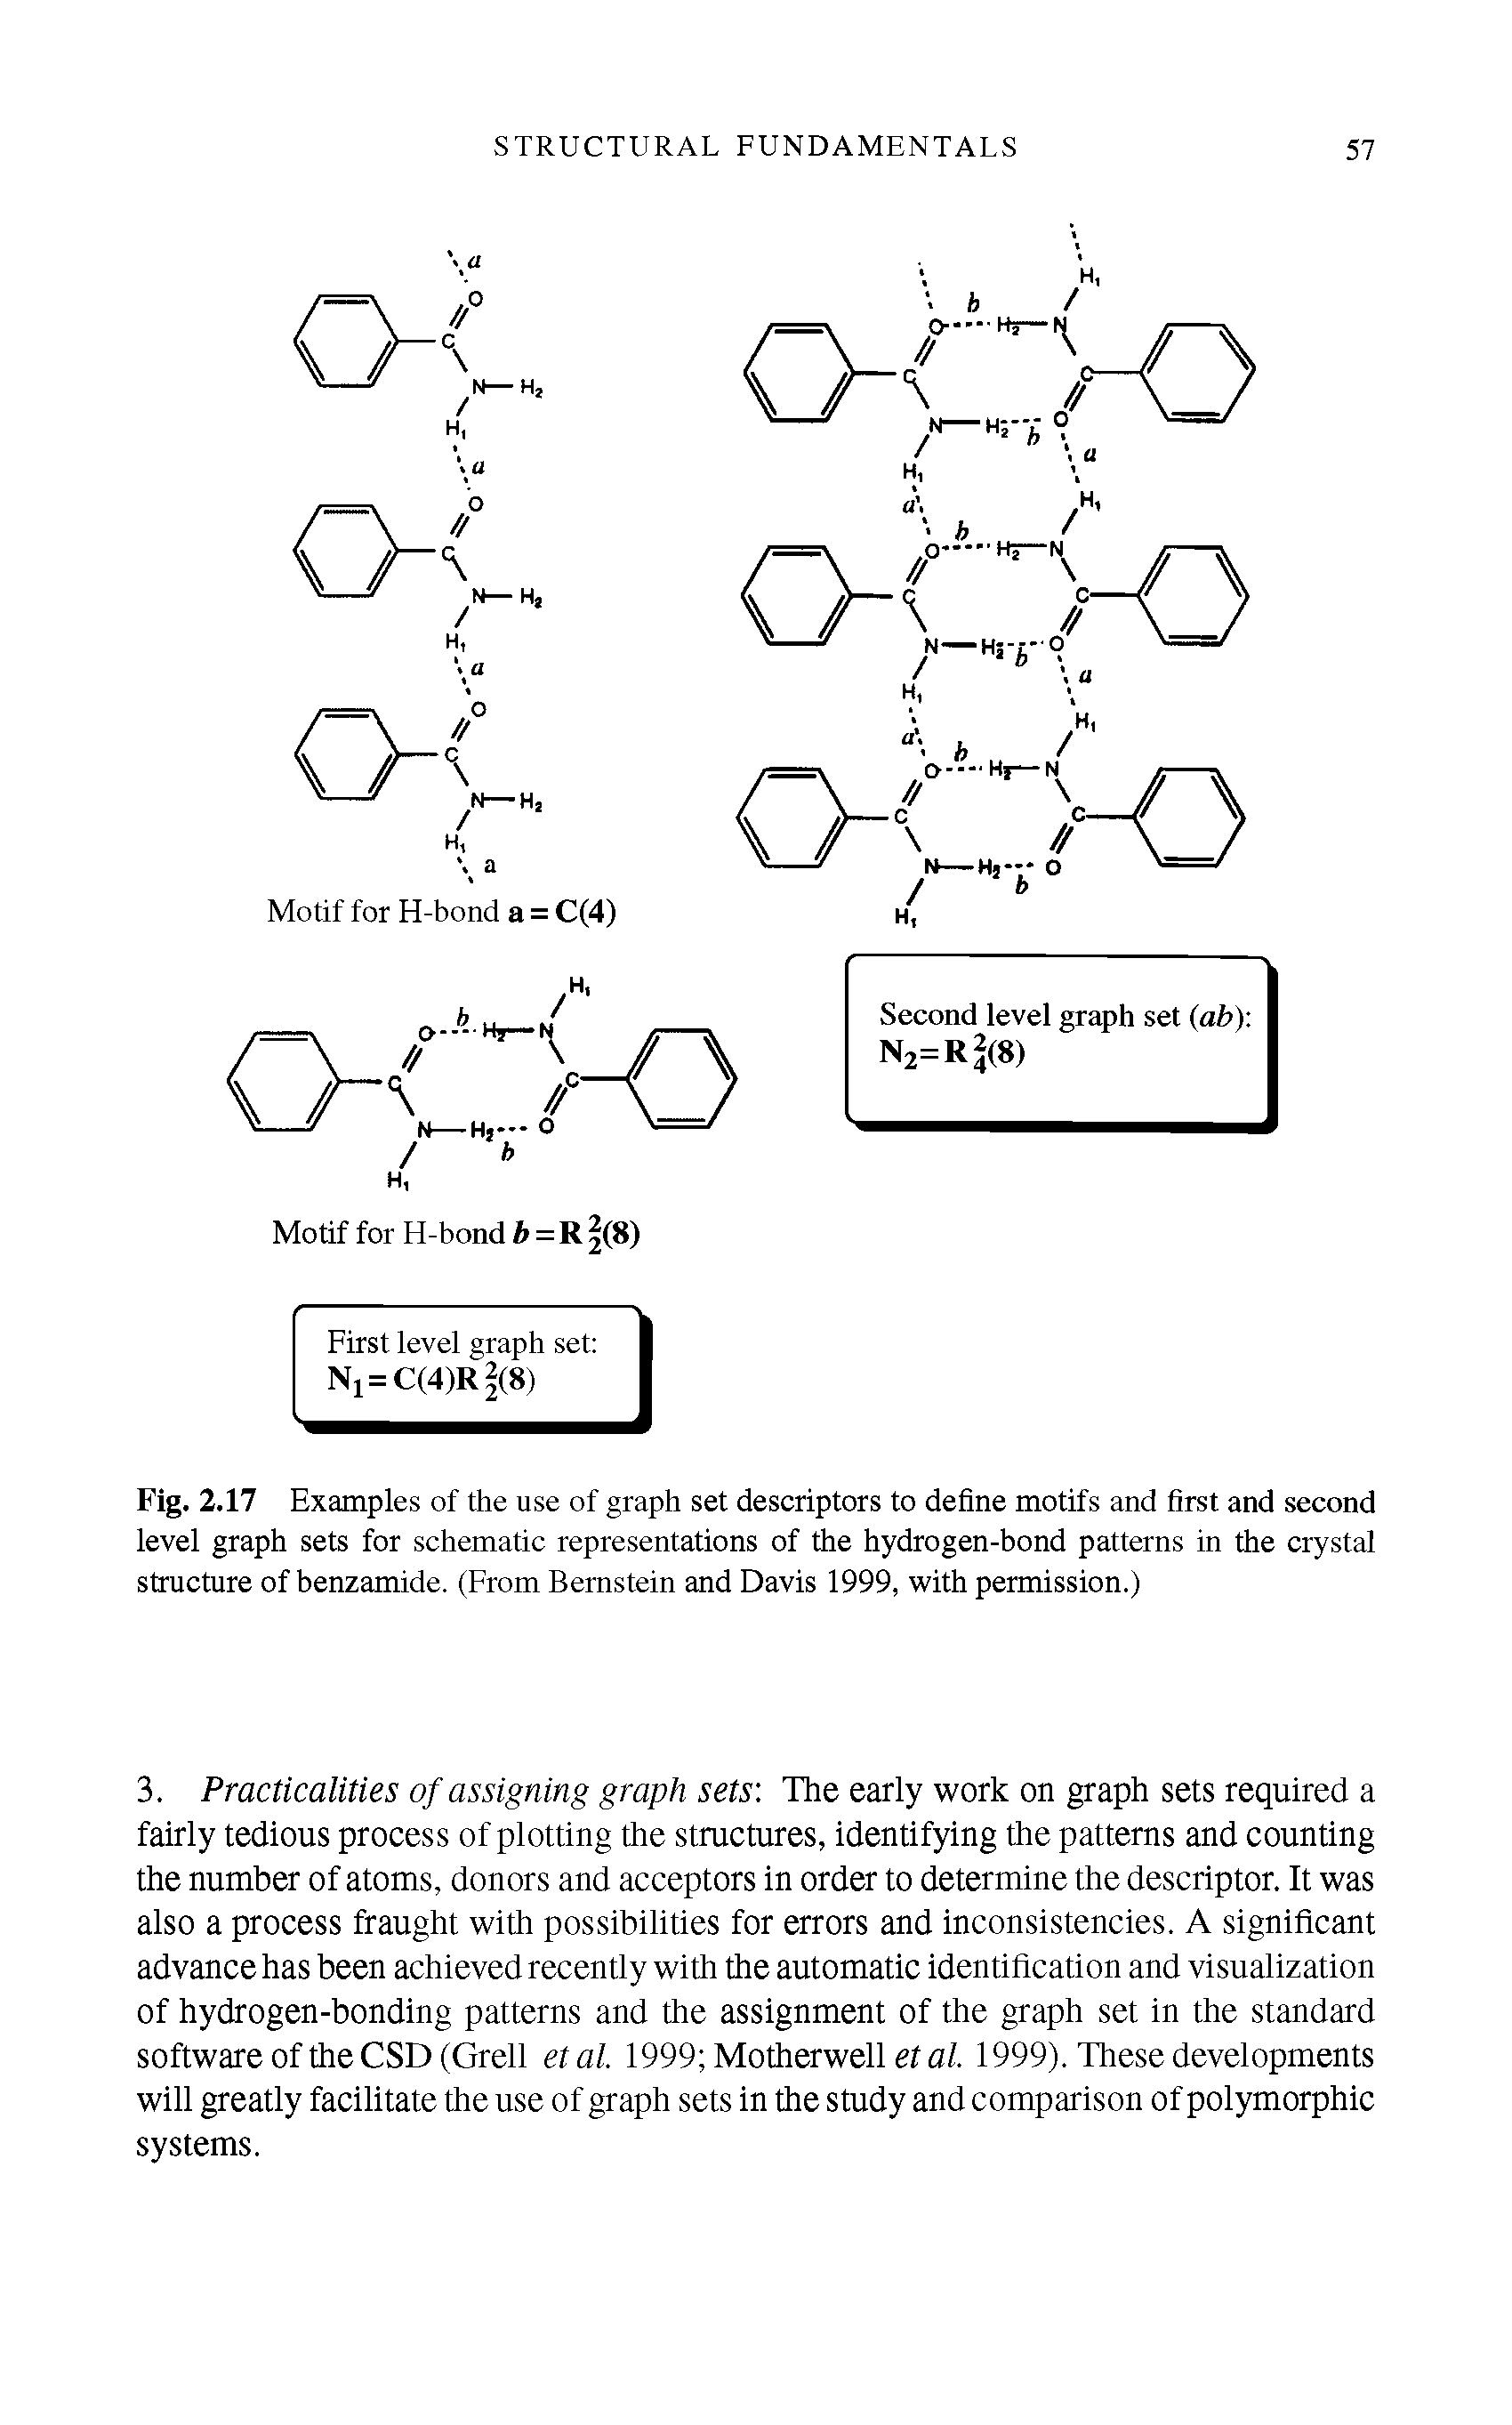 Fig. 2.17 Examples of the use of graph set descriptors to define motifs and first and second level graph sets for schematic representations of the hydrogen-bond patterns in the crystal structure of benzamide. (From Bernstein and Davis 1999, with permission.)...